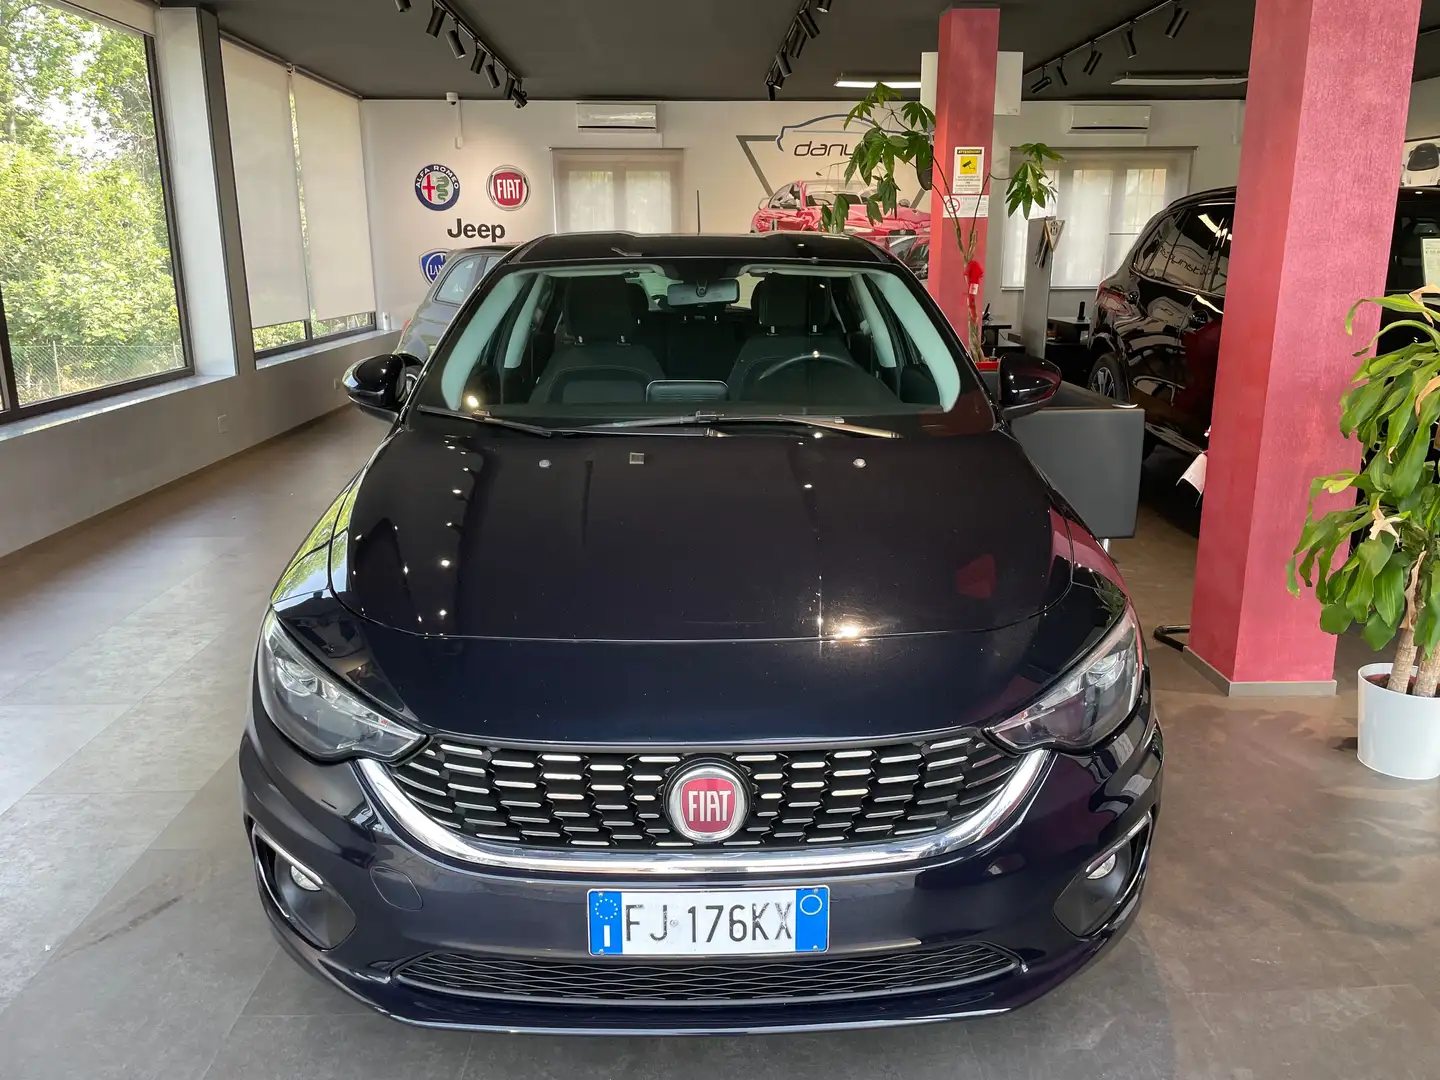 Fiat Tipo Tipo 5p 1.6 mjt Business s Azul - 2